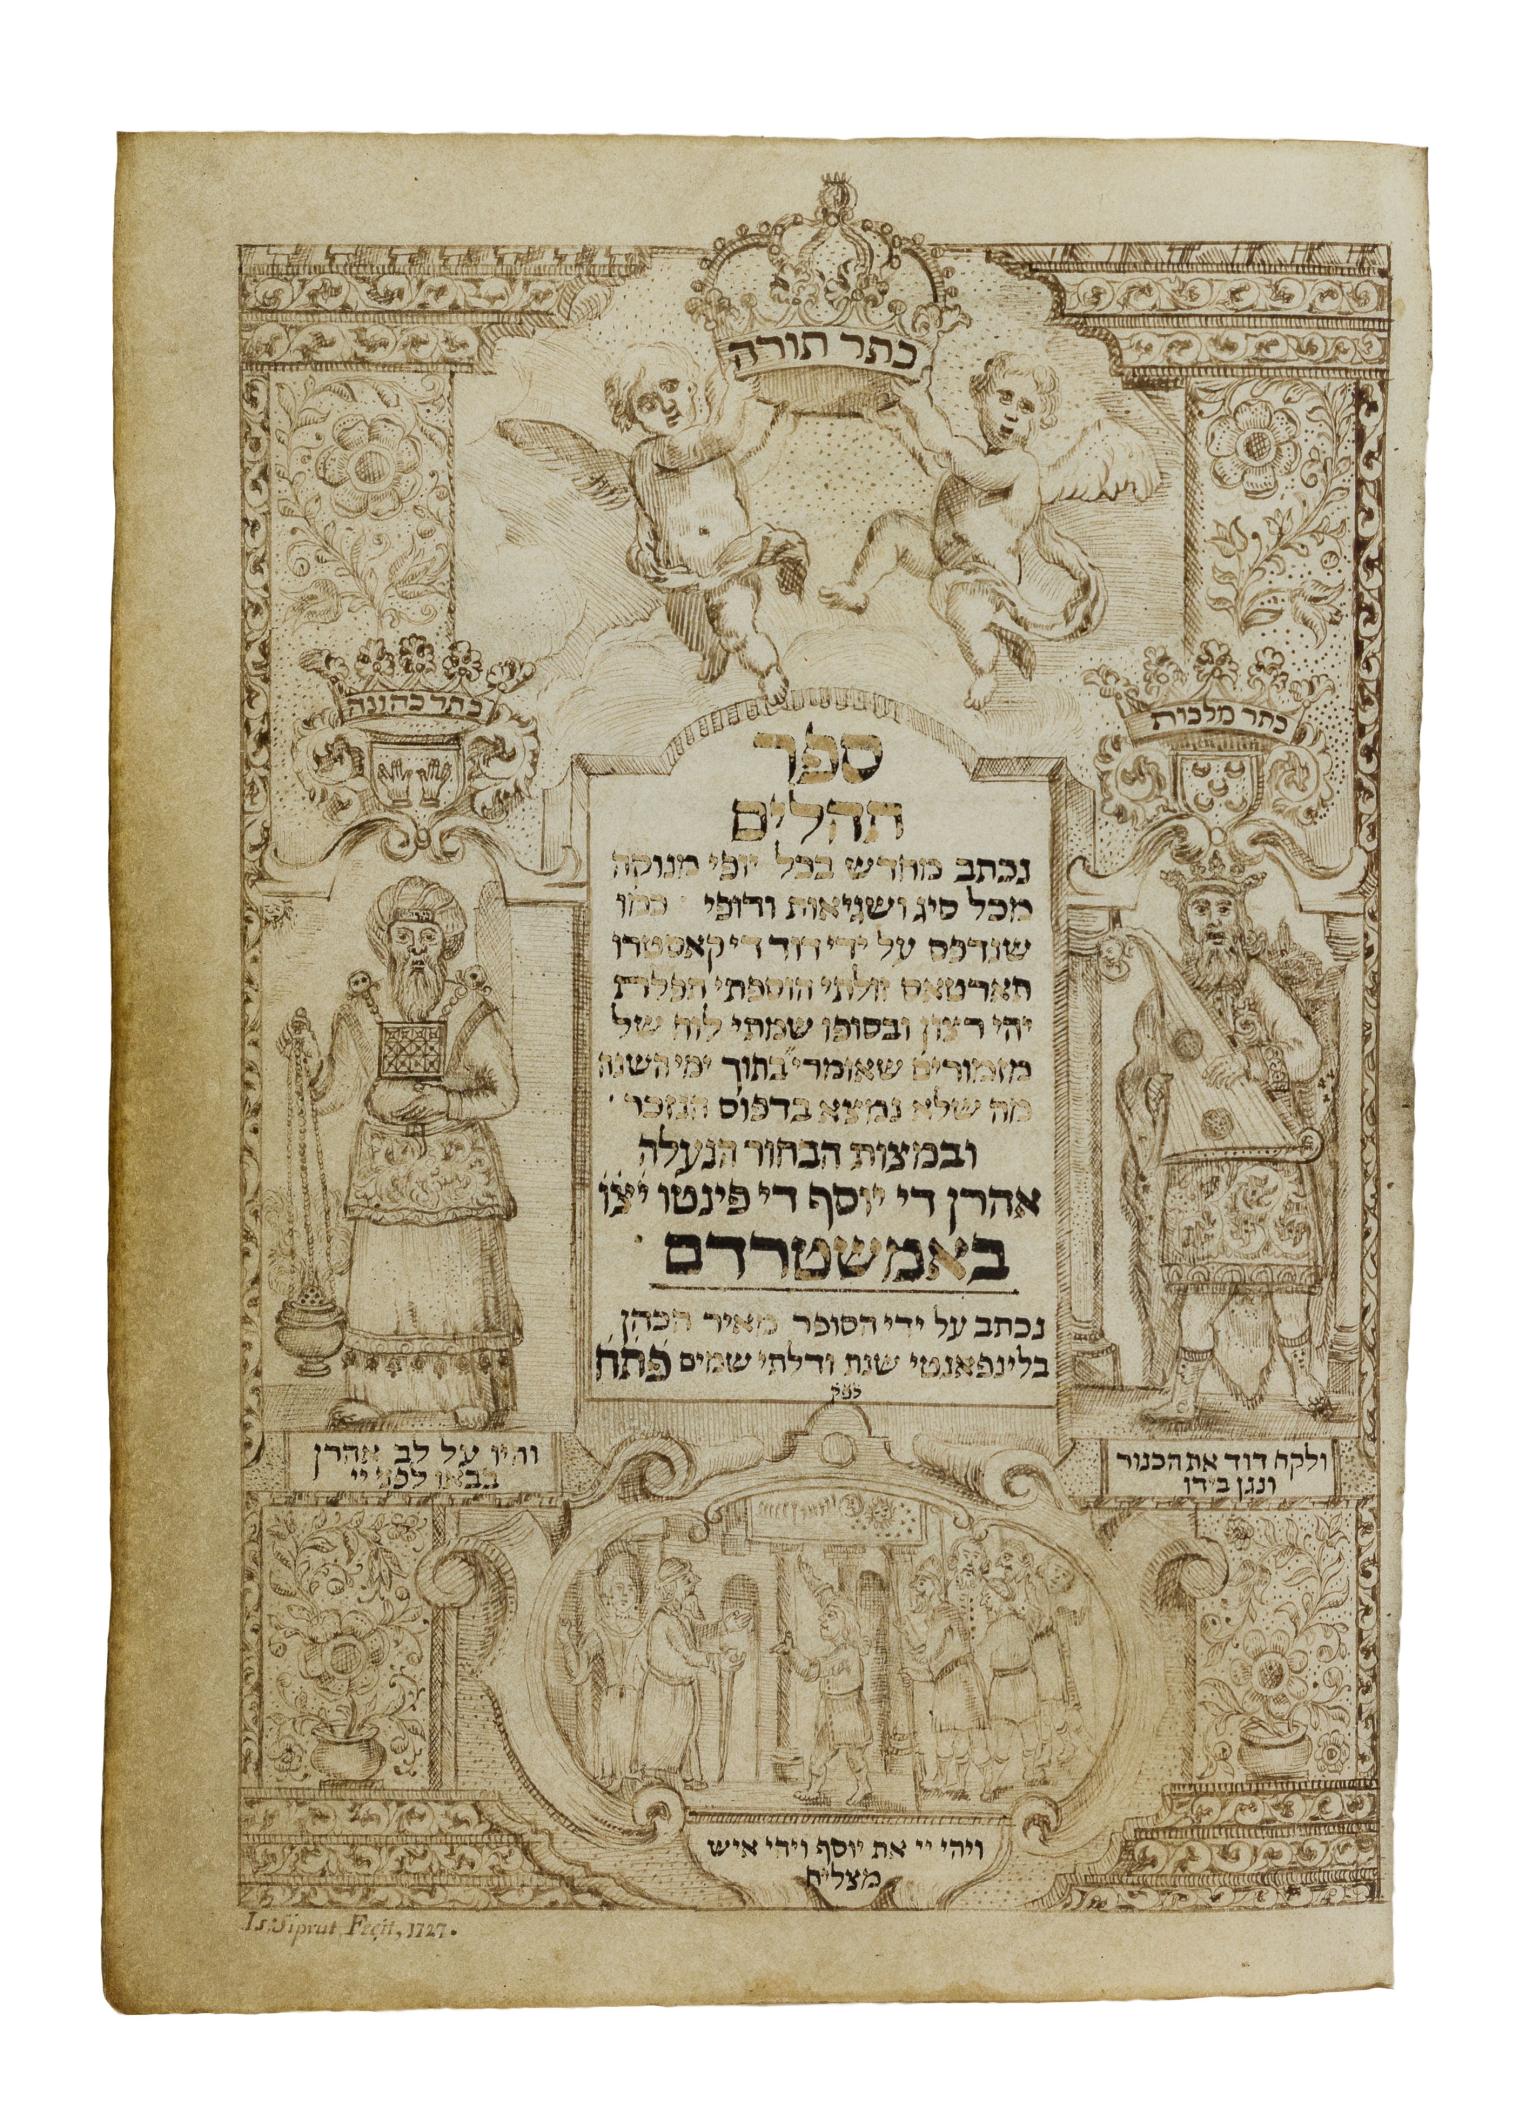 Manuscript page of Hebrew text in center framed with decorations and figures and scenes including two cherubs holding a crown at top, a king holding a harp, and a man holding censer, both with crowns above their heads, and figures at bottom.